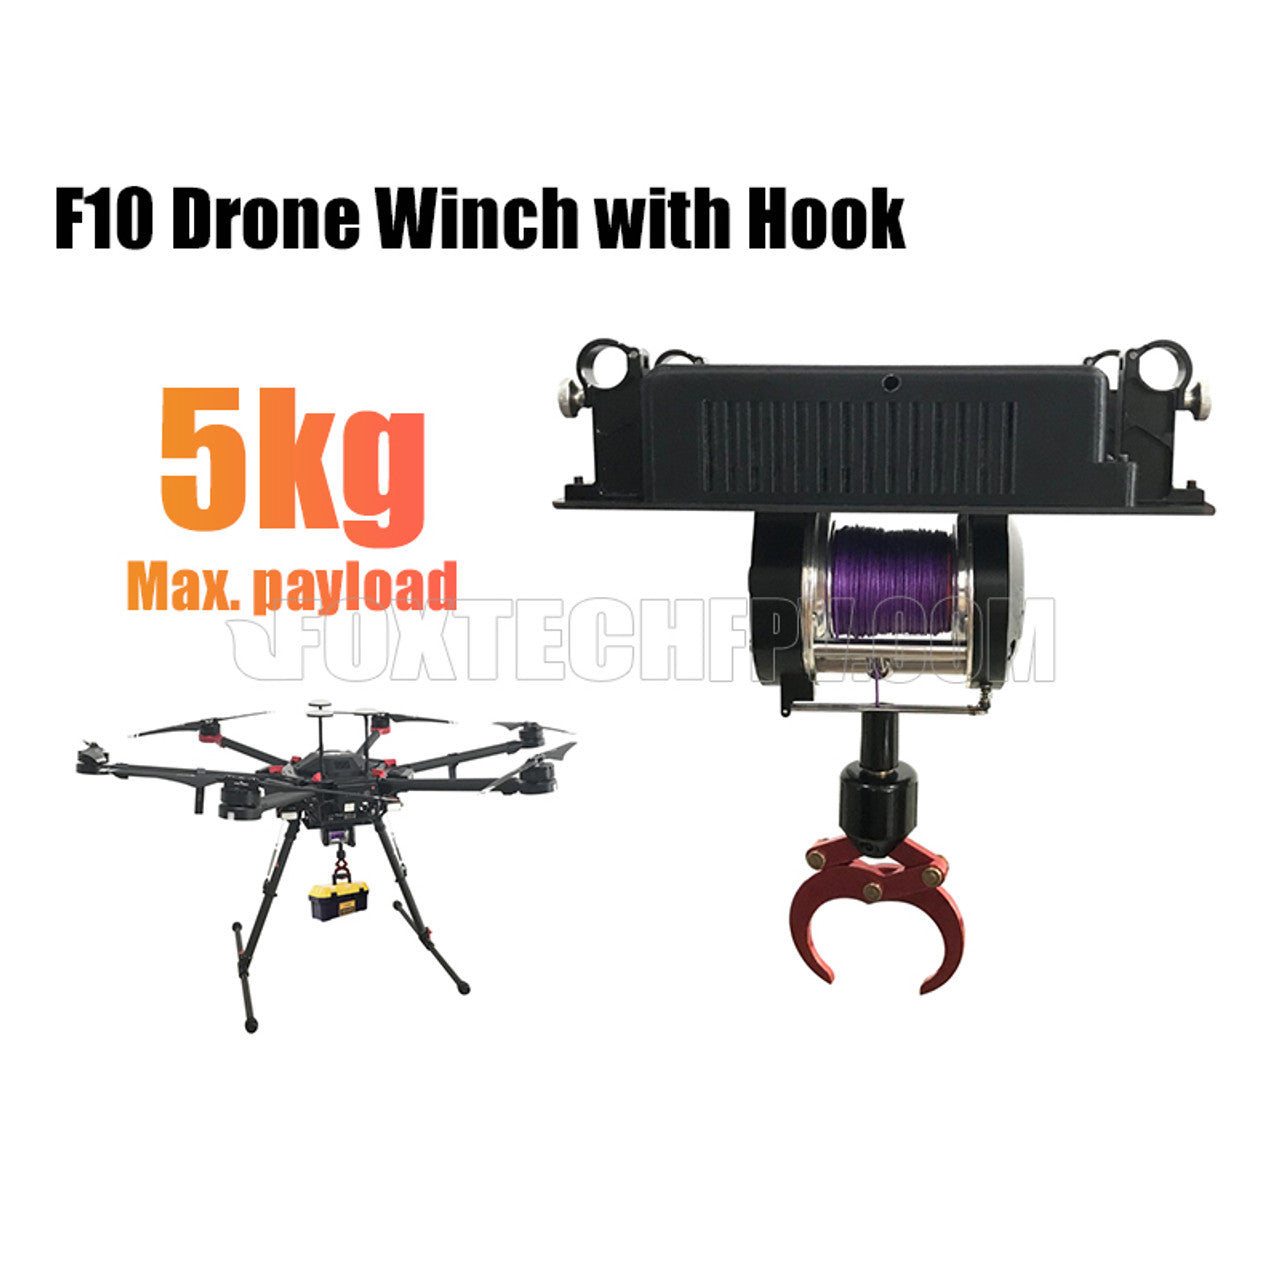 Industrial drone with built-in hook lifts up to 5kg payload securely.